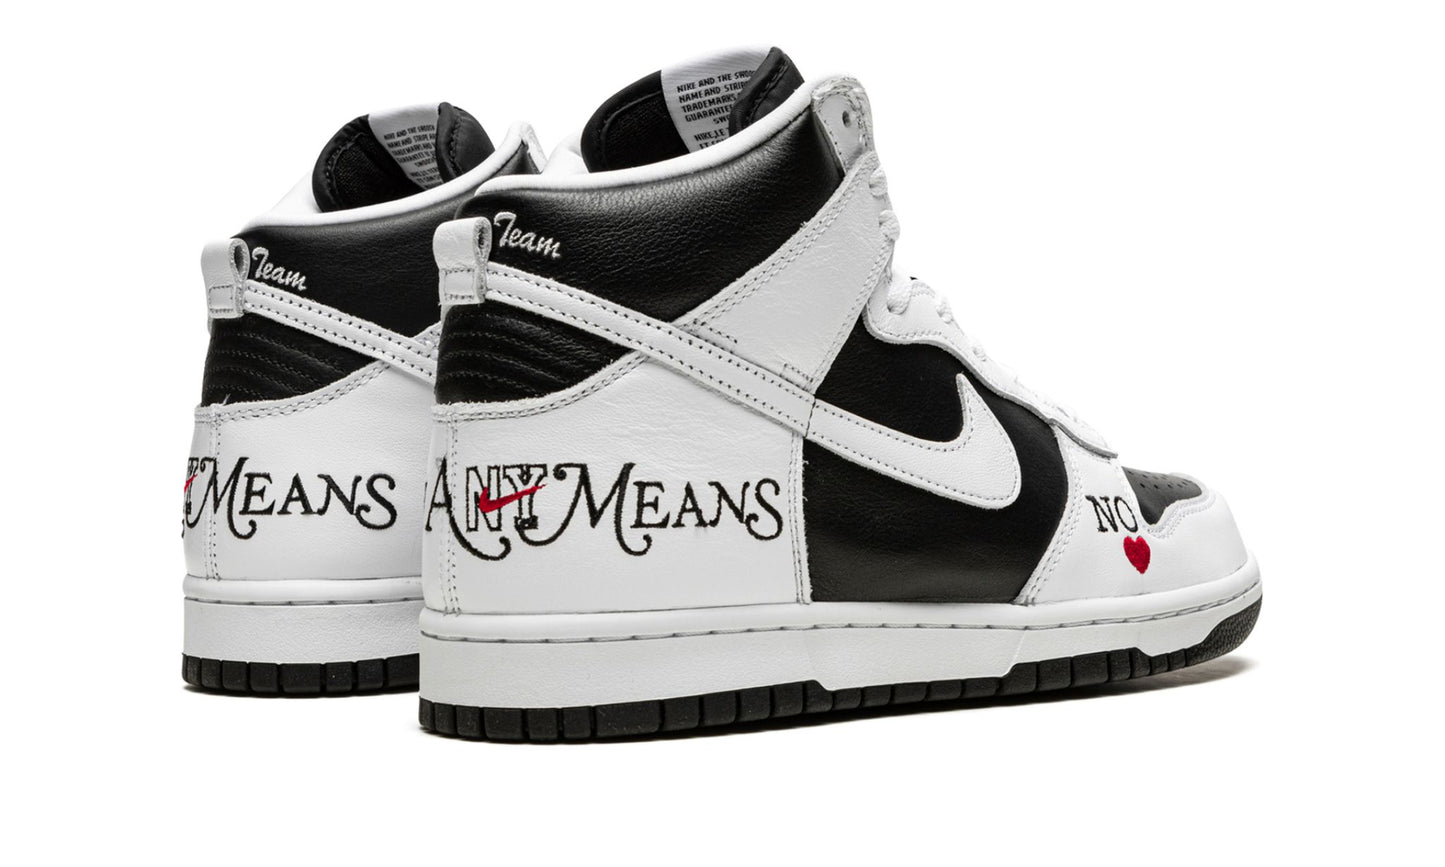 Nike SB Dunk High Supreme By Any Means White Black